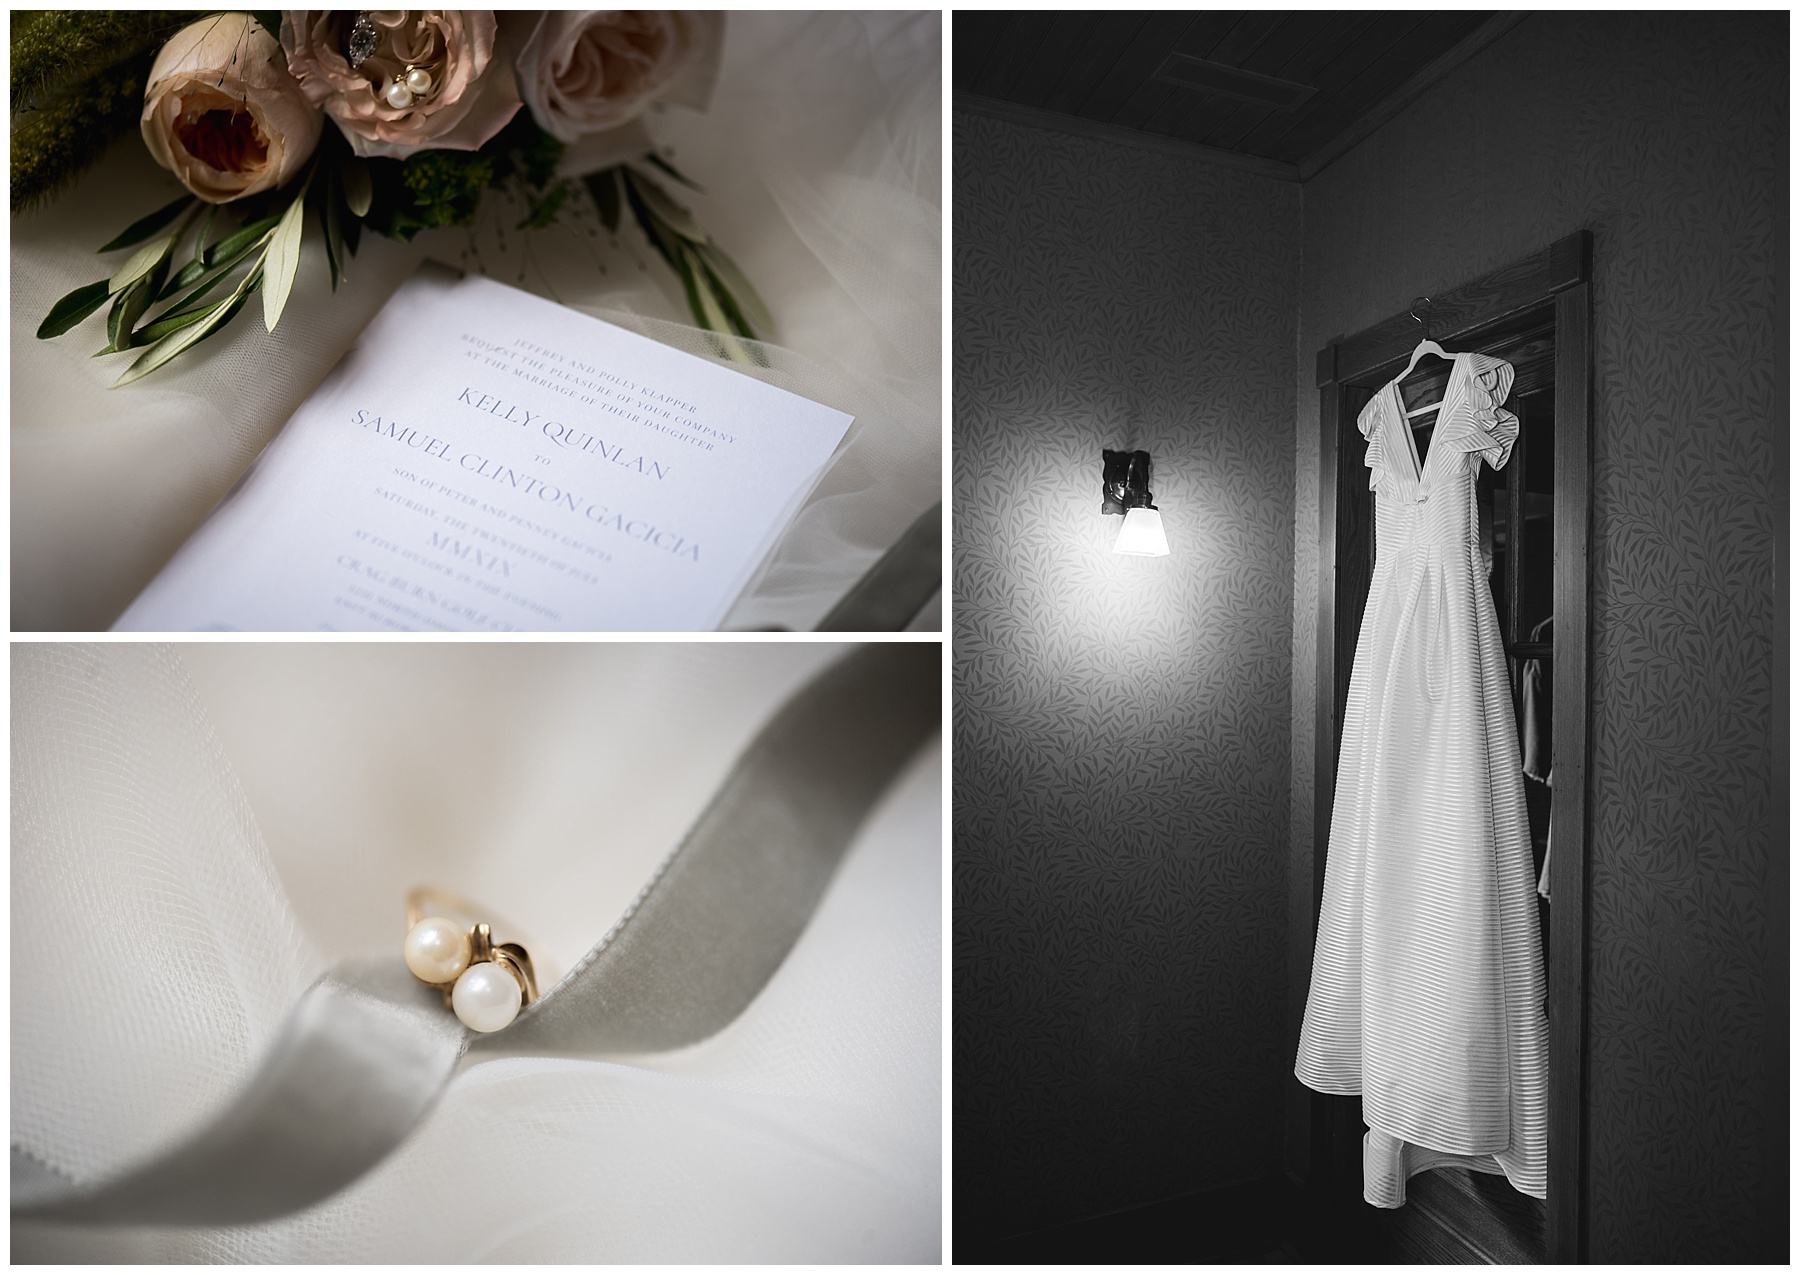 wedding day dress, invitation, and pearl earrings